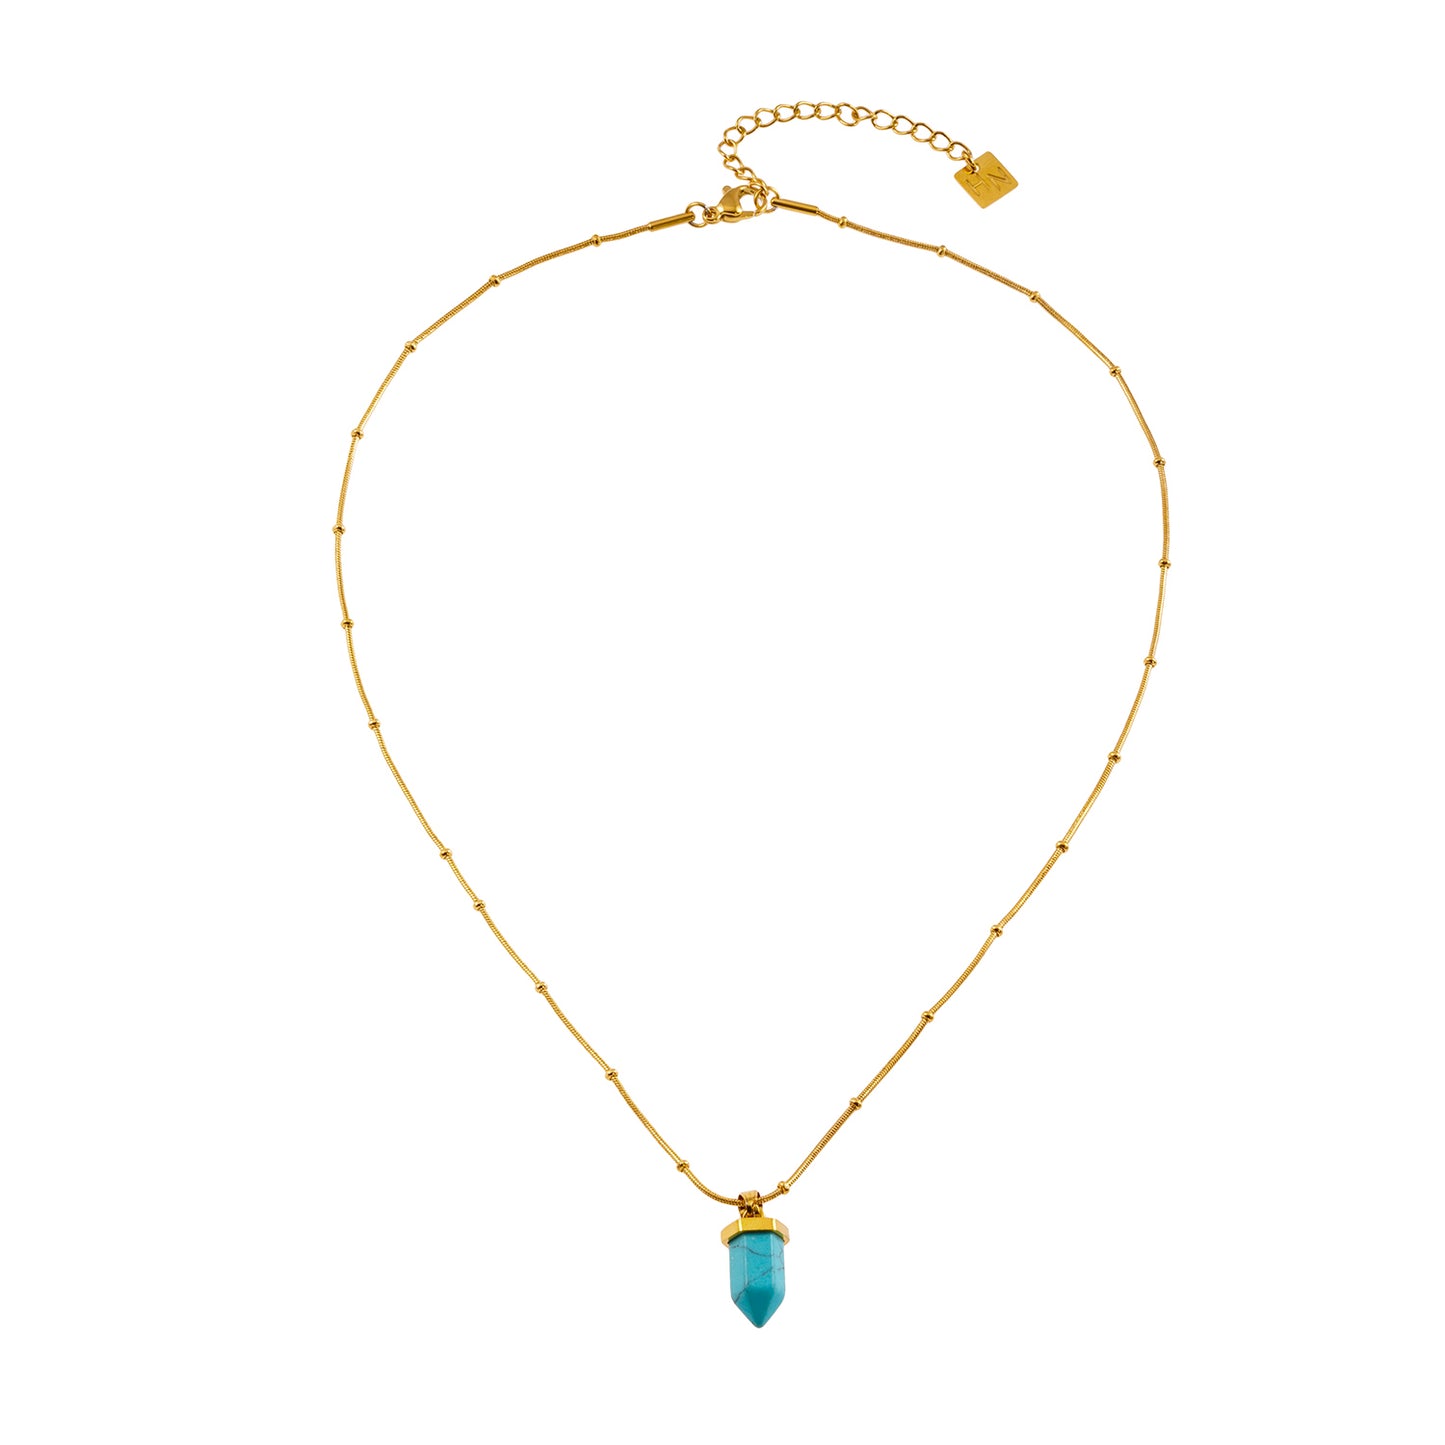 PIPPA: African Turquoise Stone Pendant Anchored on a Beaded Snake Skin Textured Chain Necklace.